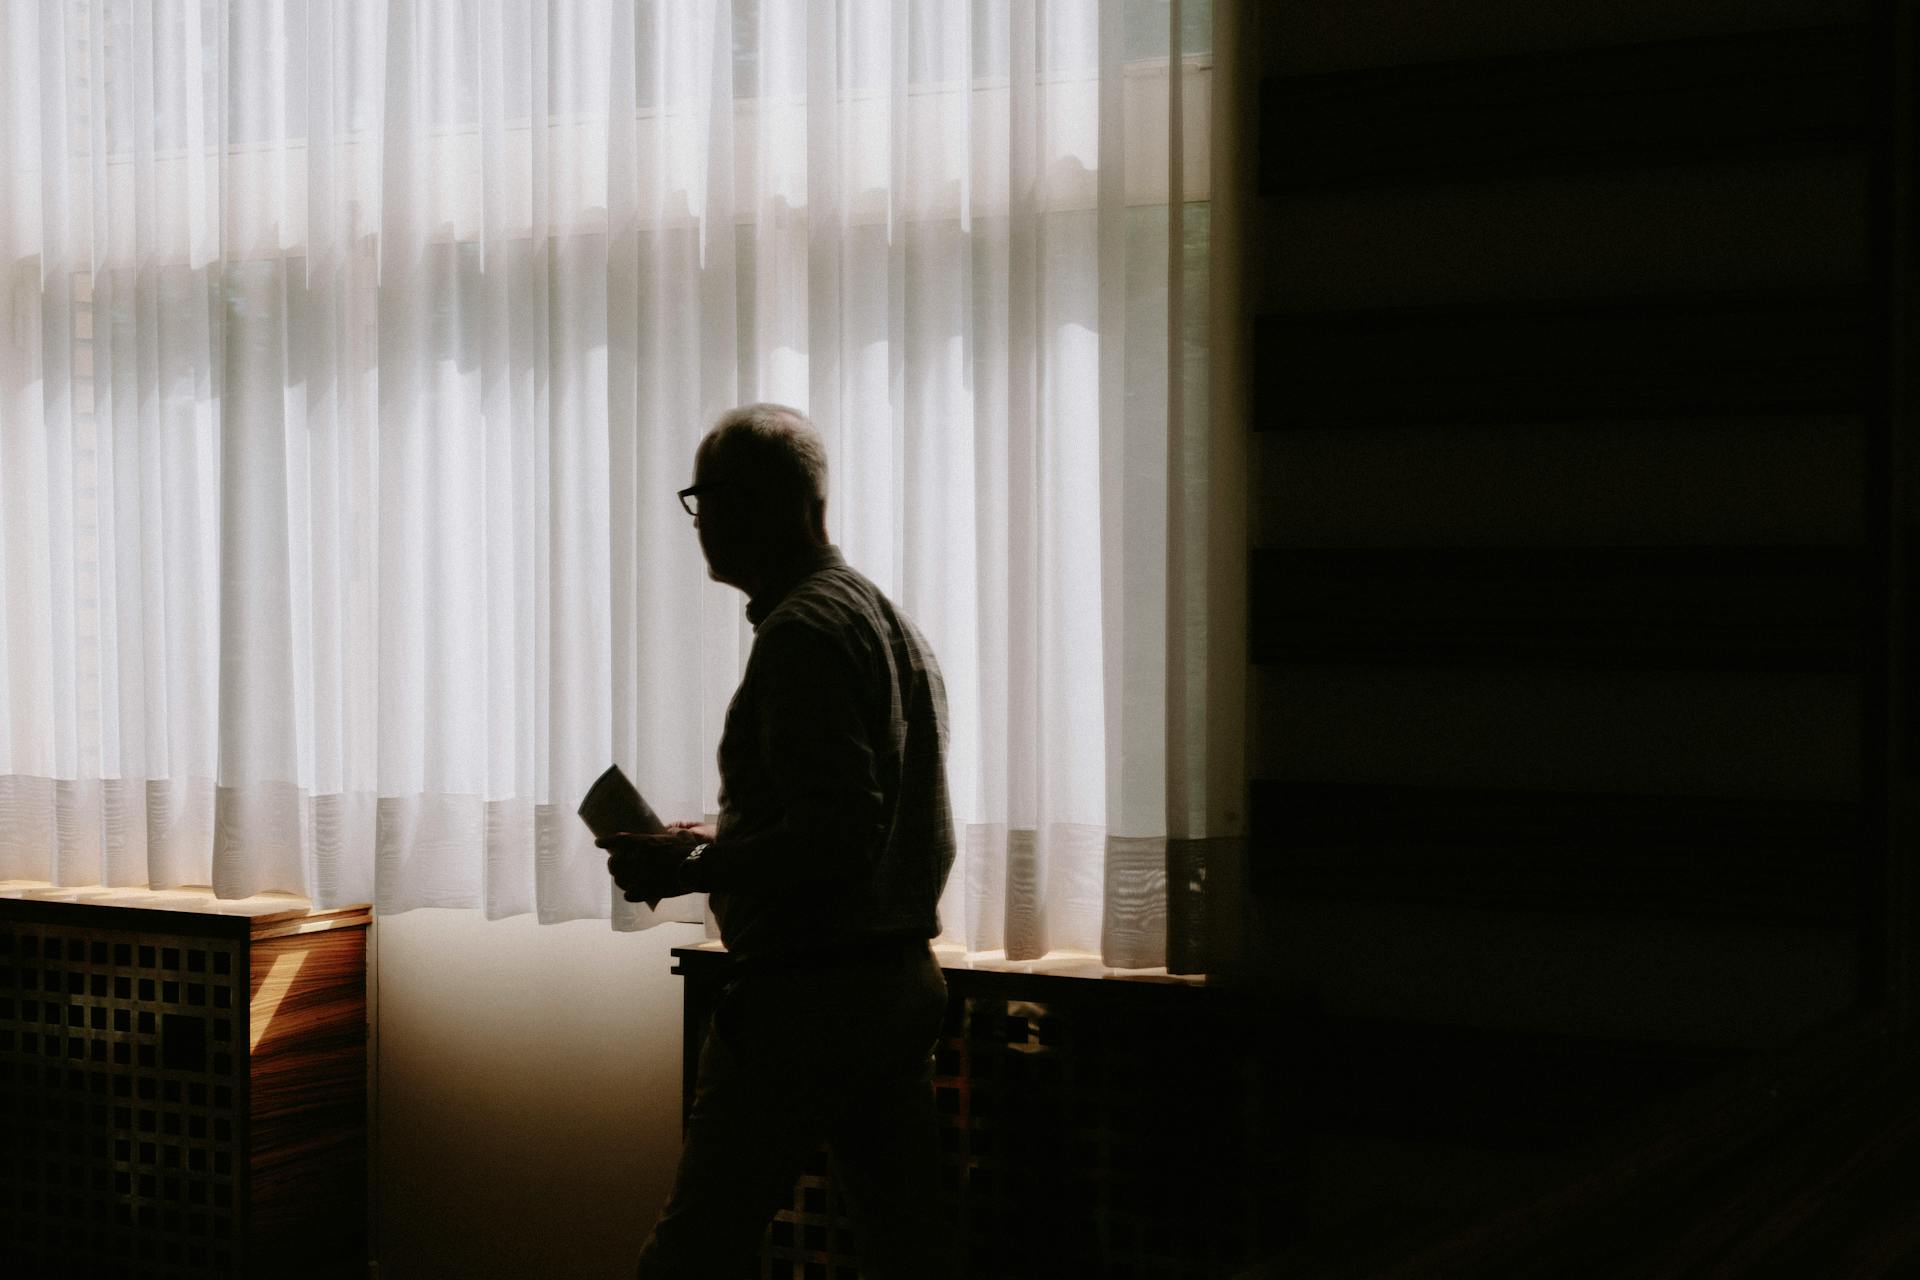 A man in the living room | Source: Pexels